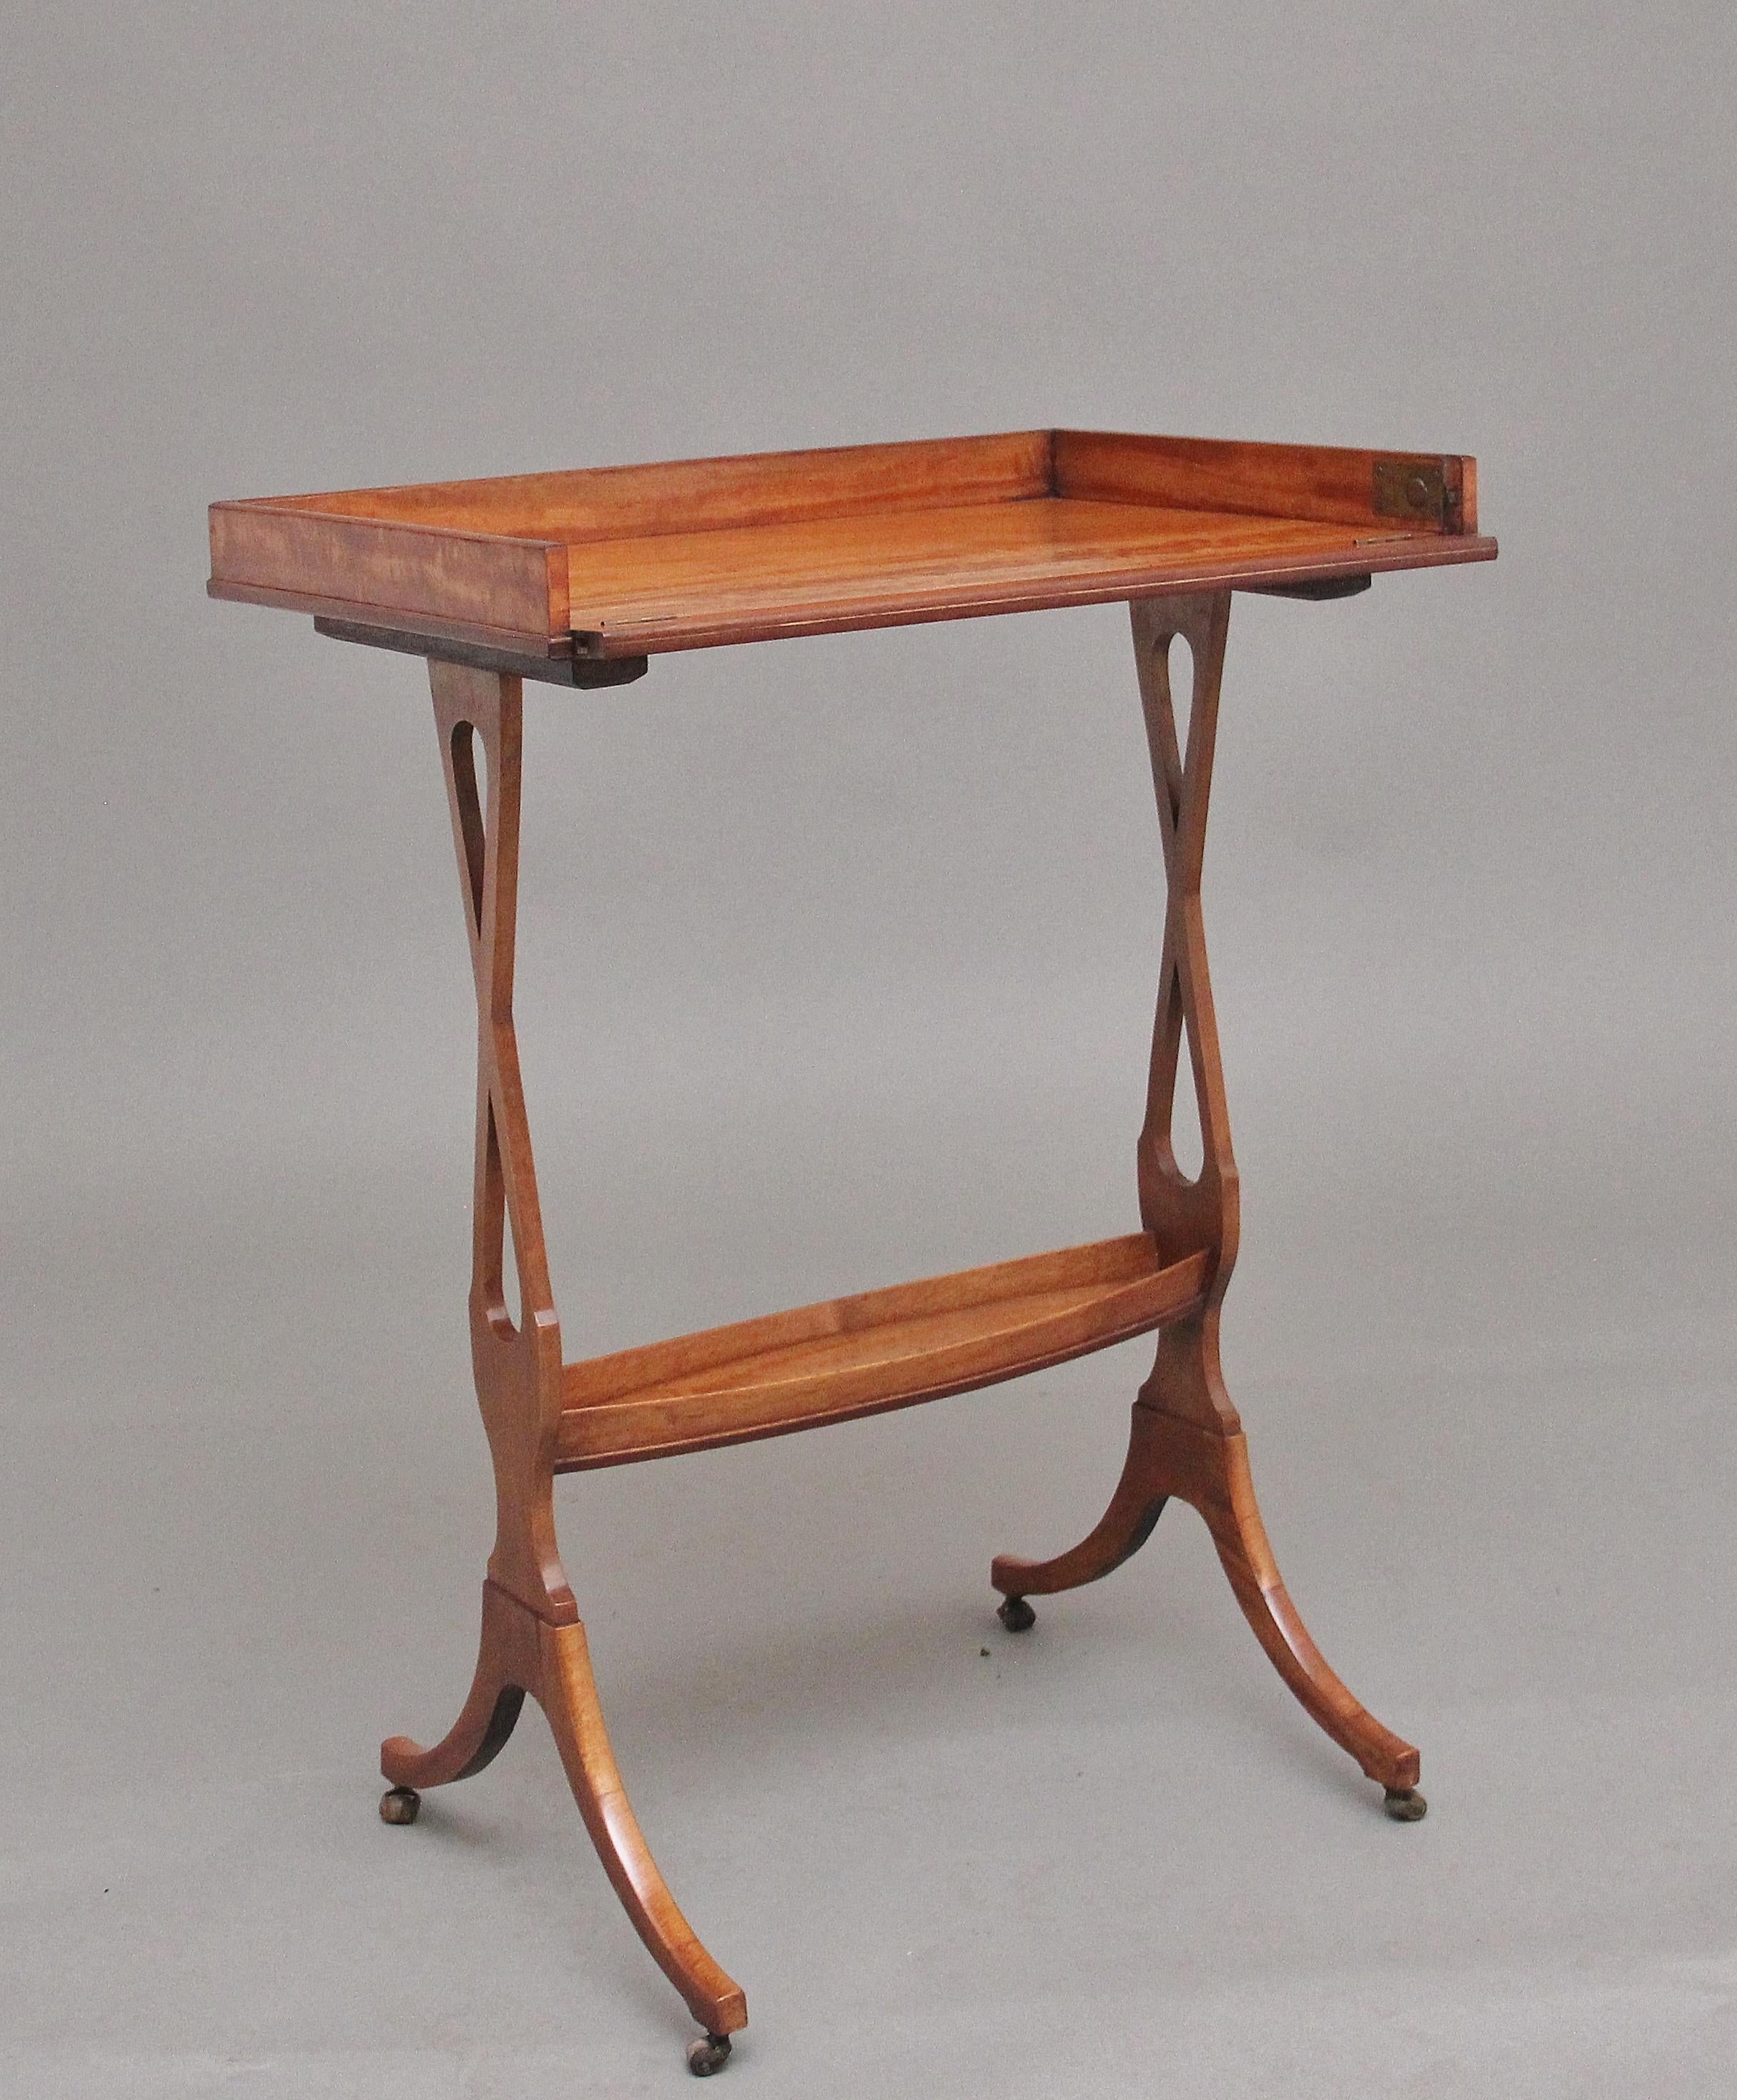 19th Century Sheraton Revival satinwood serving / drinks table, having a nice figured top with a gallery with a hinged drop down side, supported on slender lyre-shaped supports united with a shelf stretcher, terminating on elegant shaped legs with